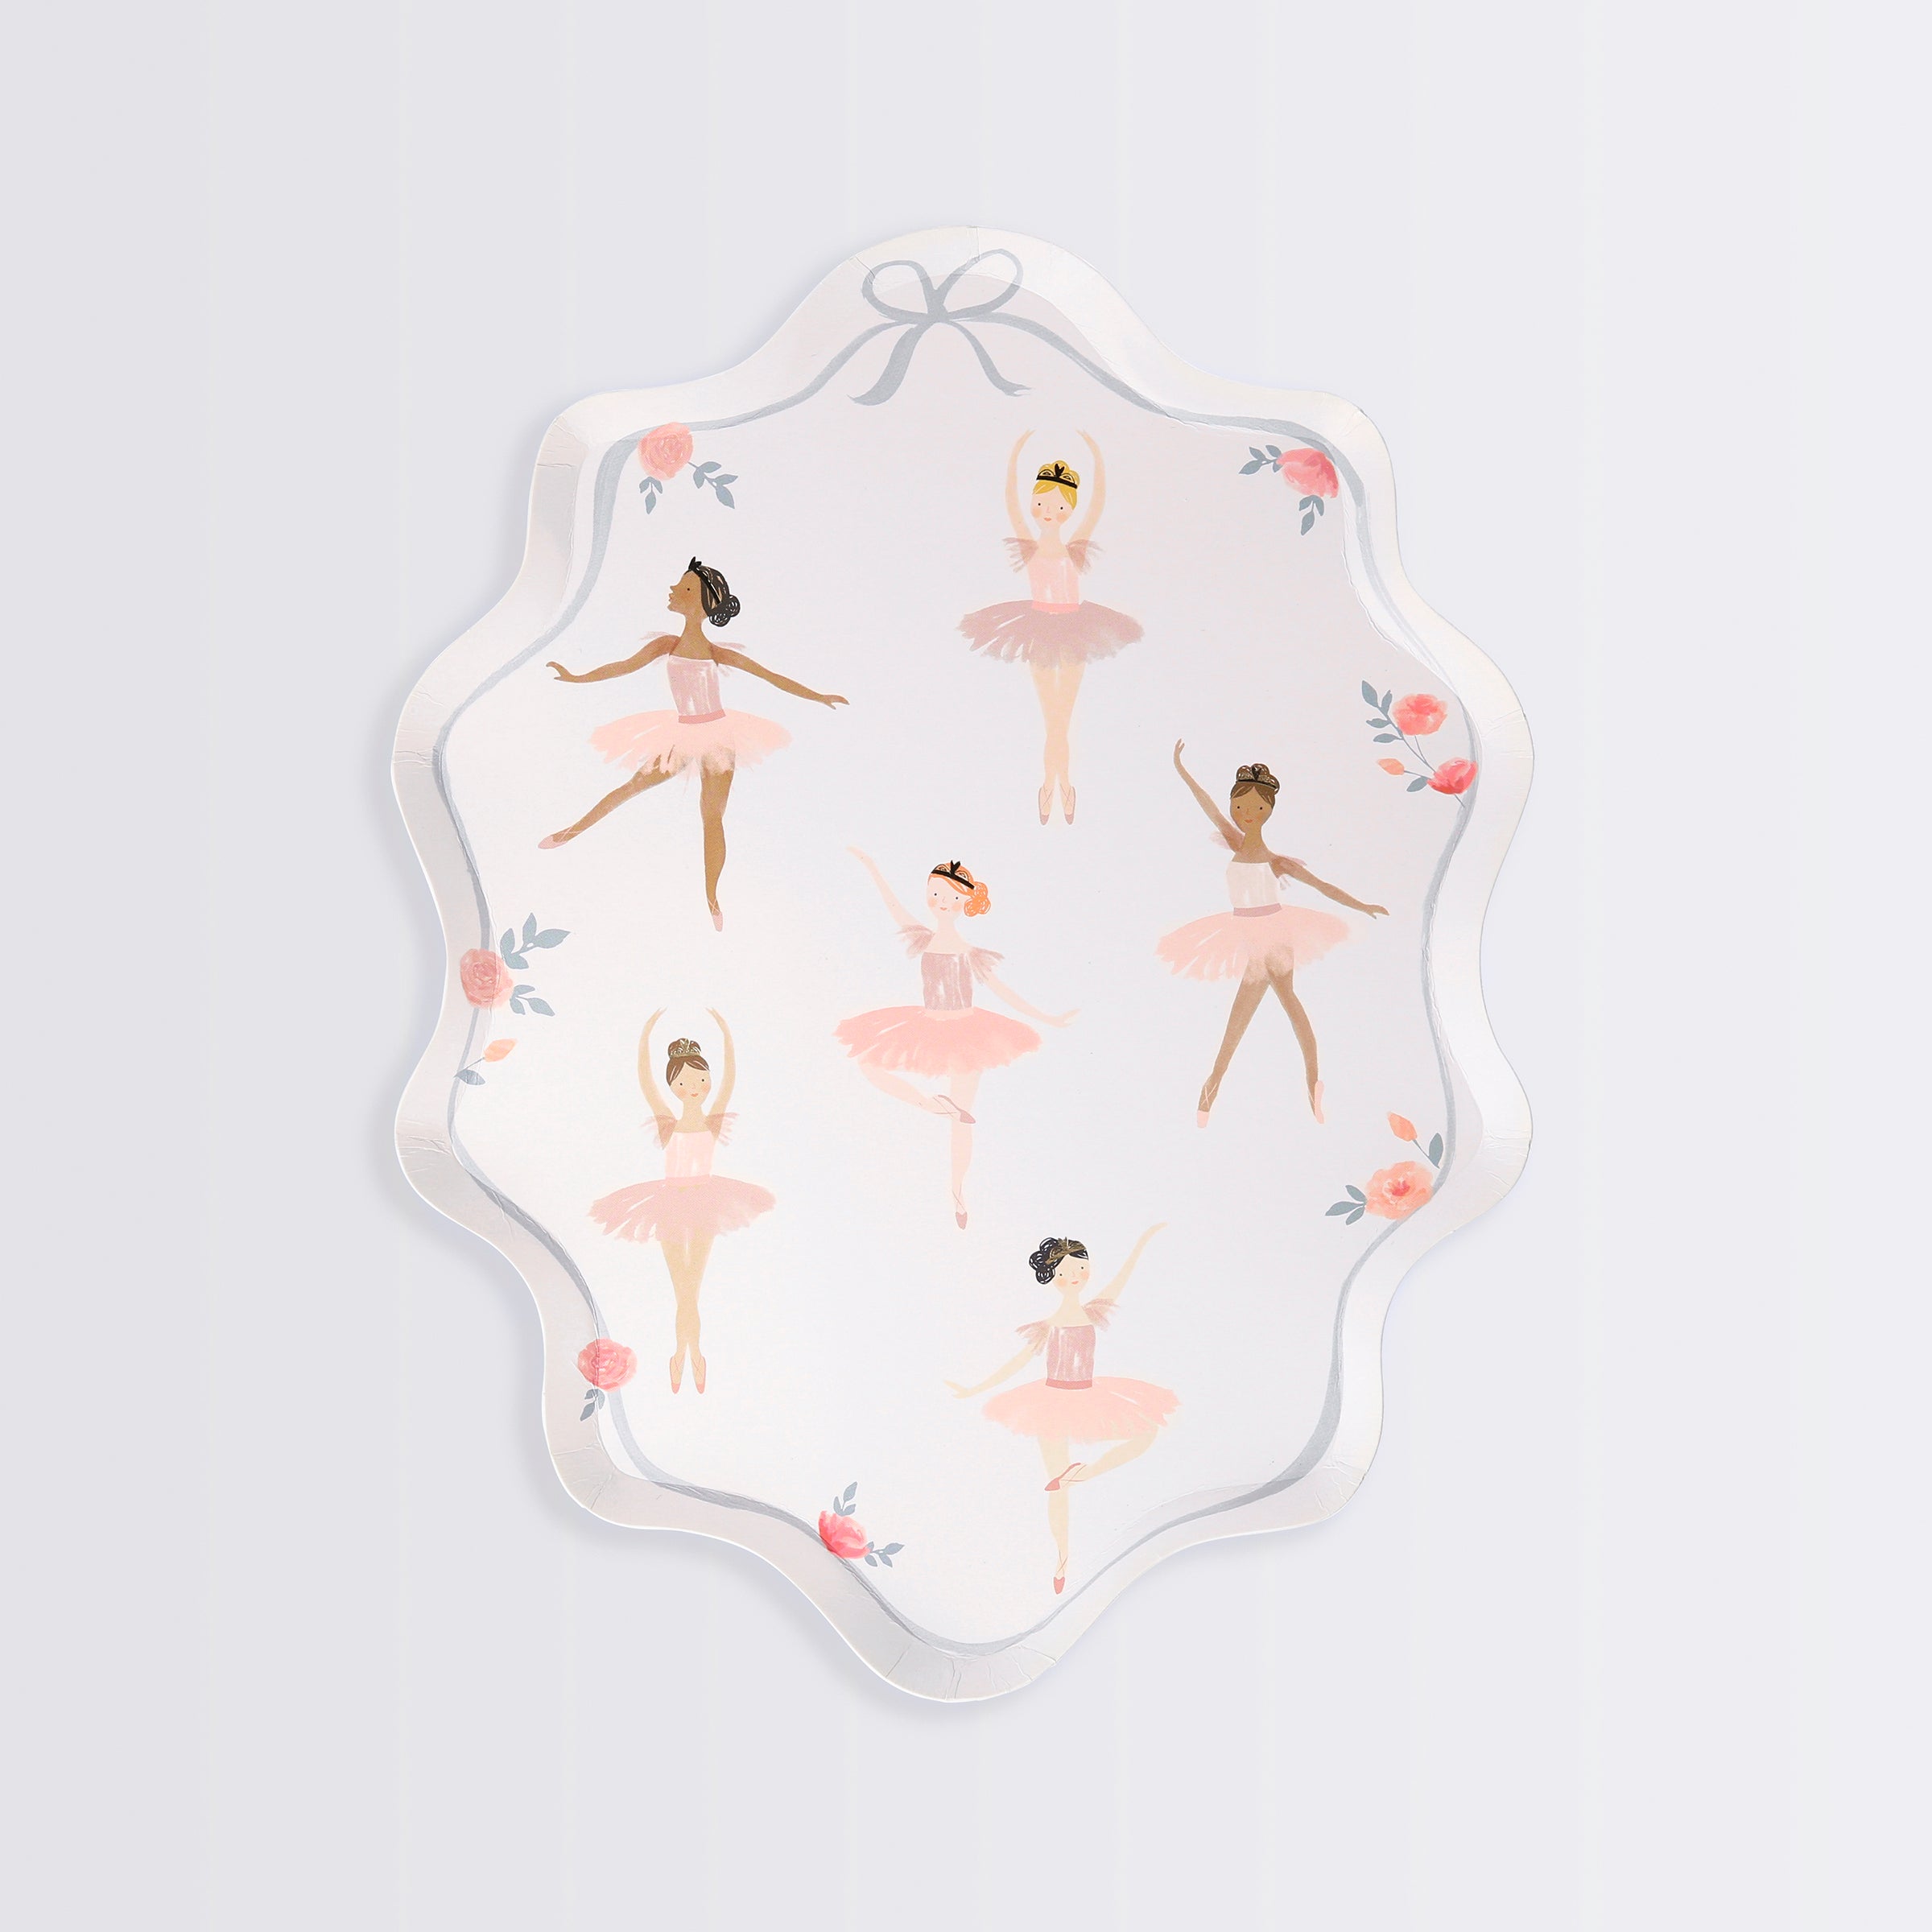 Our paper plates, featuring ballet dancers, are perfect to add to your ballerina birthday party supplies.